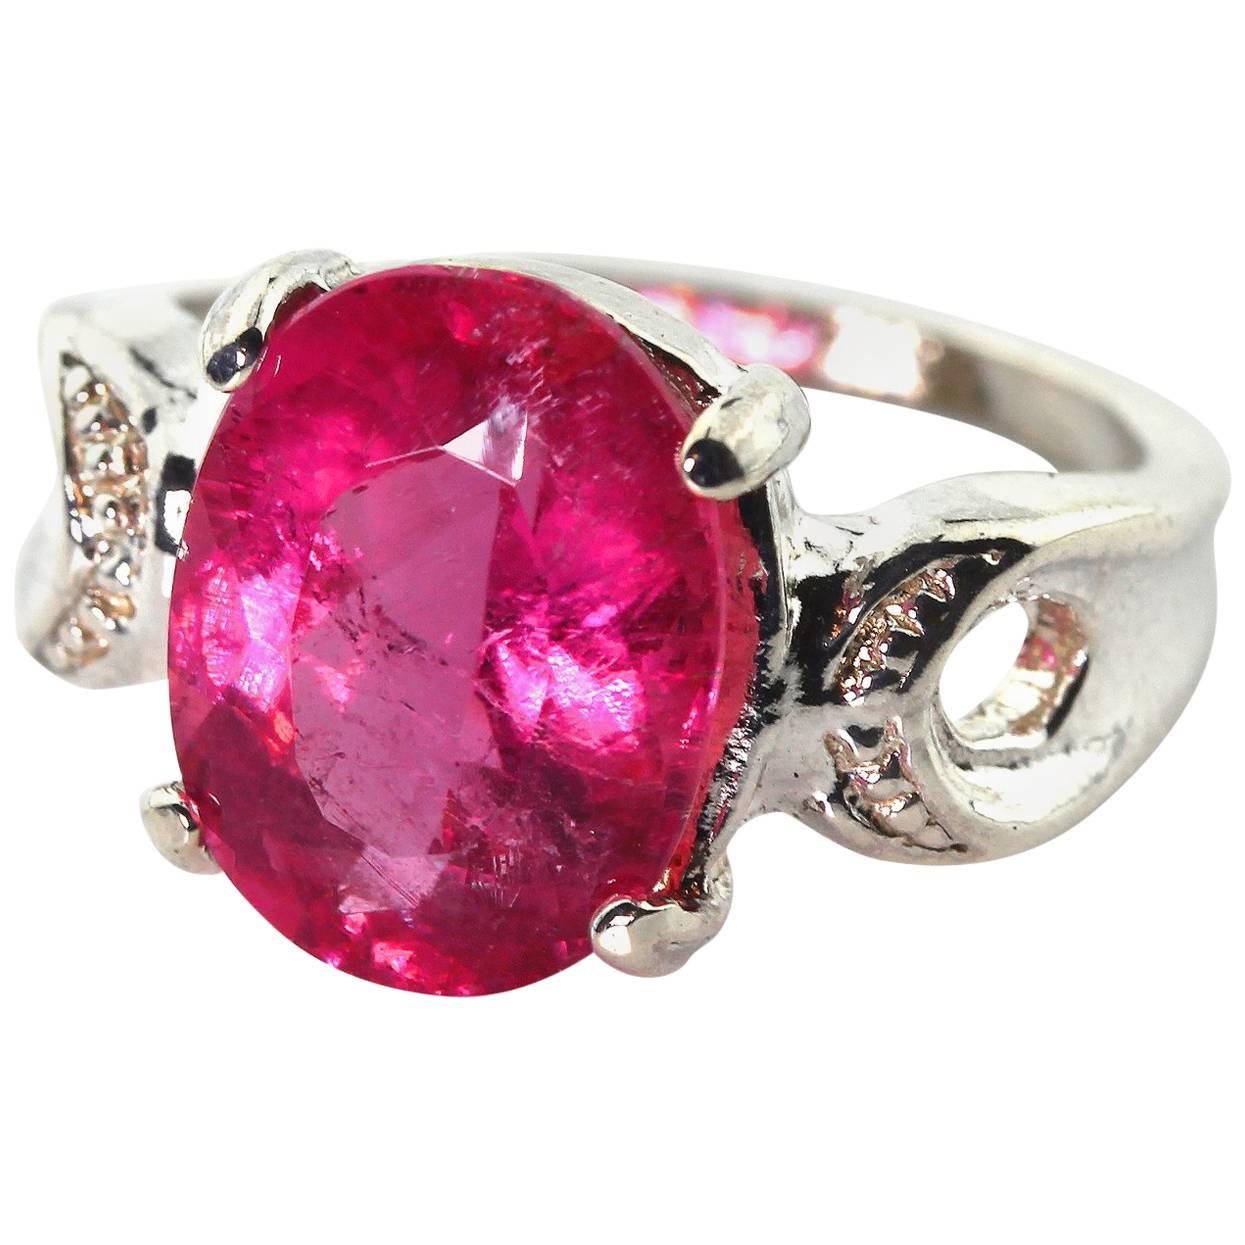 AJD Magnificent Oval 3.95 Ct Pink/Magenta Tourmaline Silver Cocktail Ring